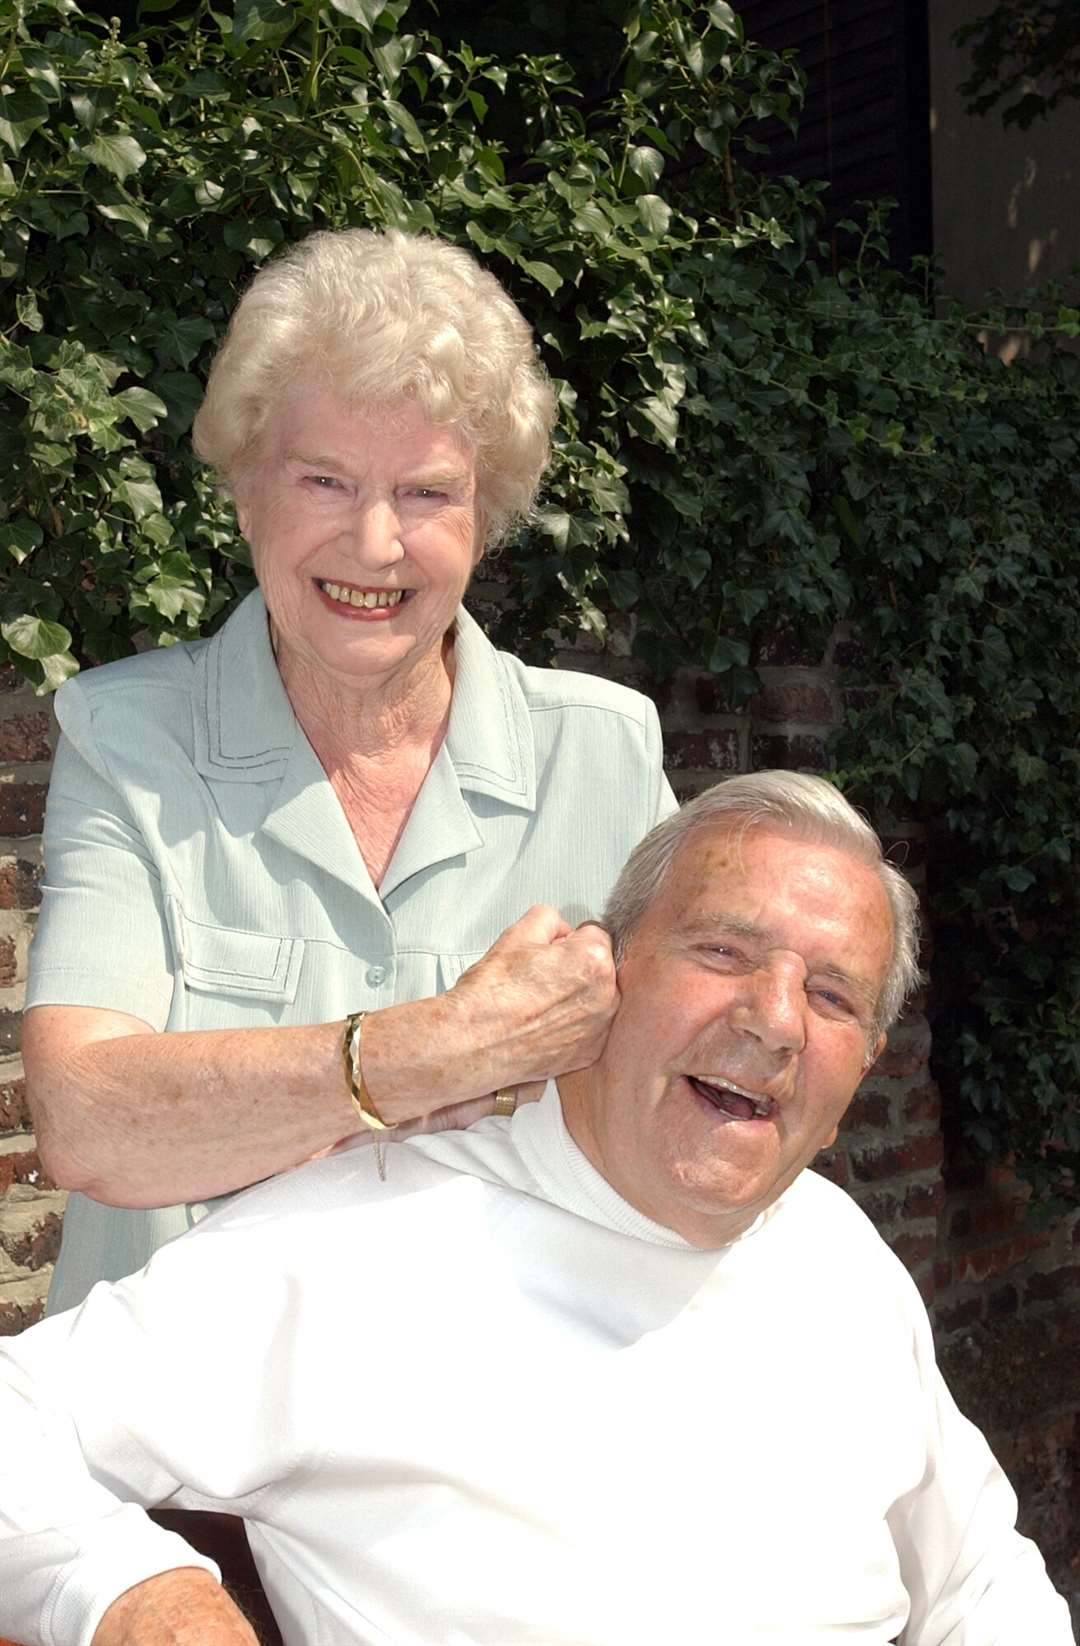 Sir Norman Wisdom would come to Deal to stay with his sister-in-law Christina, who died on Saturday, November 1.